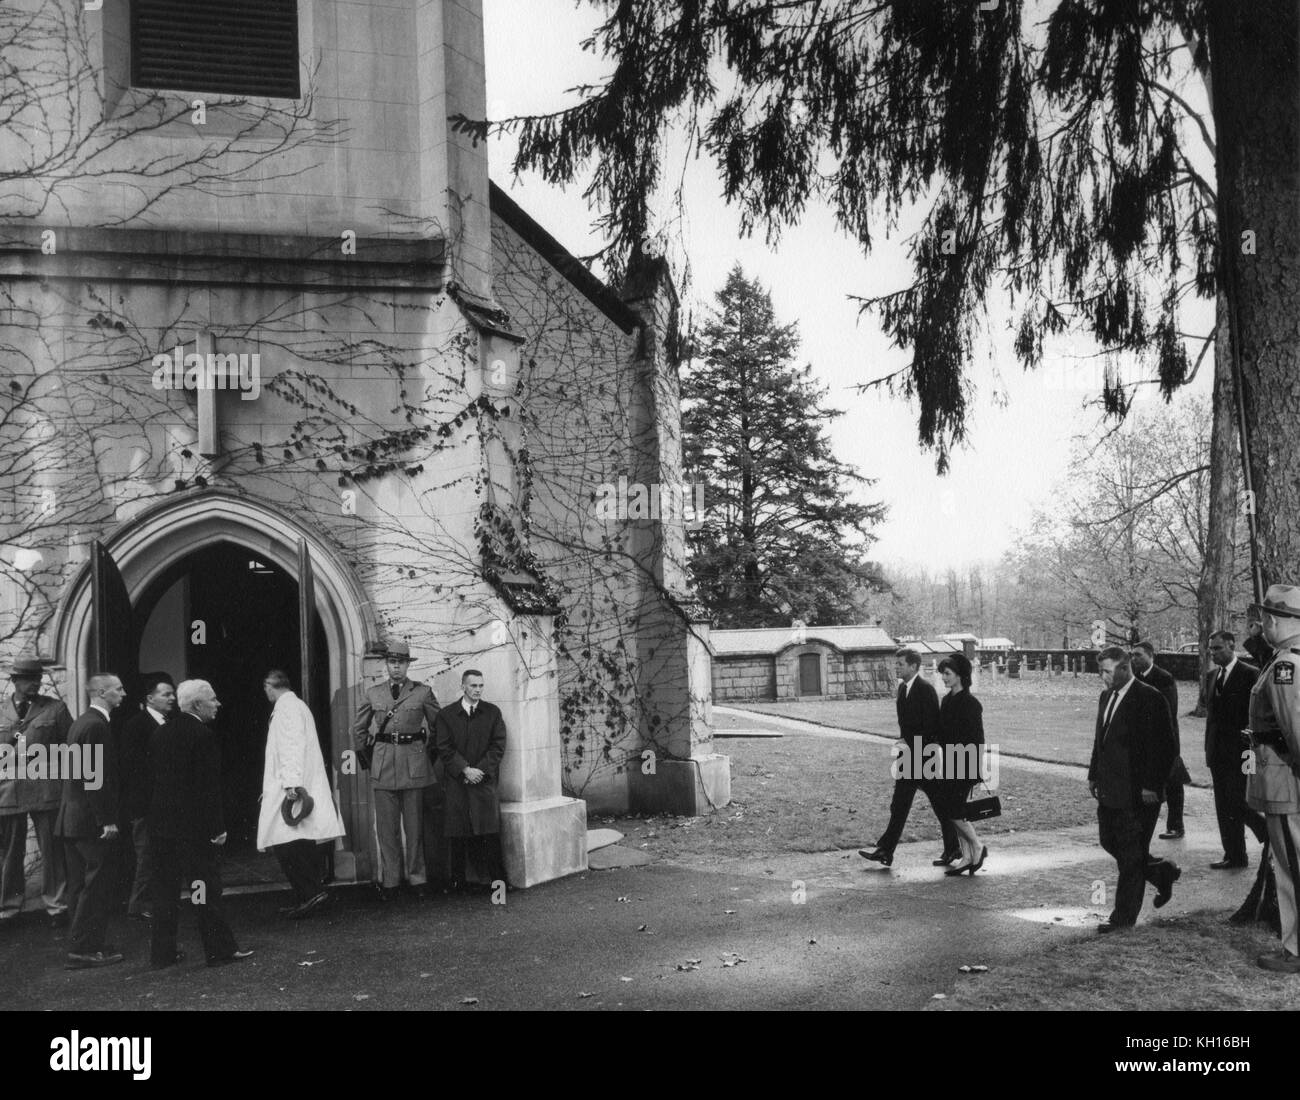 President and Mrs John F Kennedy approach St James Episcopal Church for the funeral of former First Lady Eleanor Roosevelt, Hyde Park, NY, November 10, 1962. Photo by Abbie Rowe Stock Photo